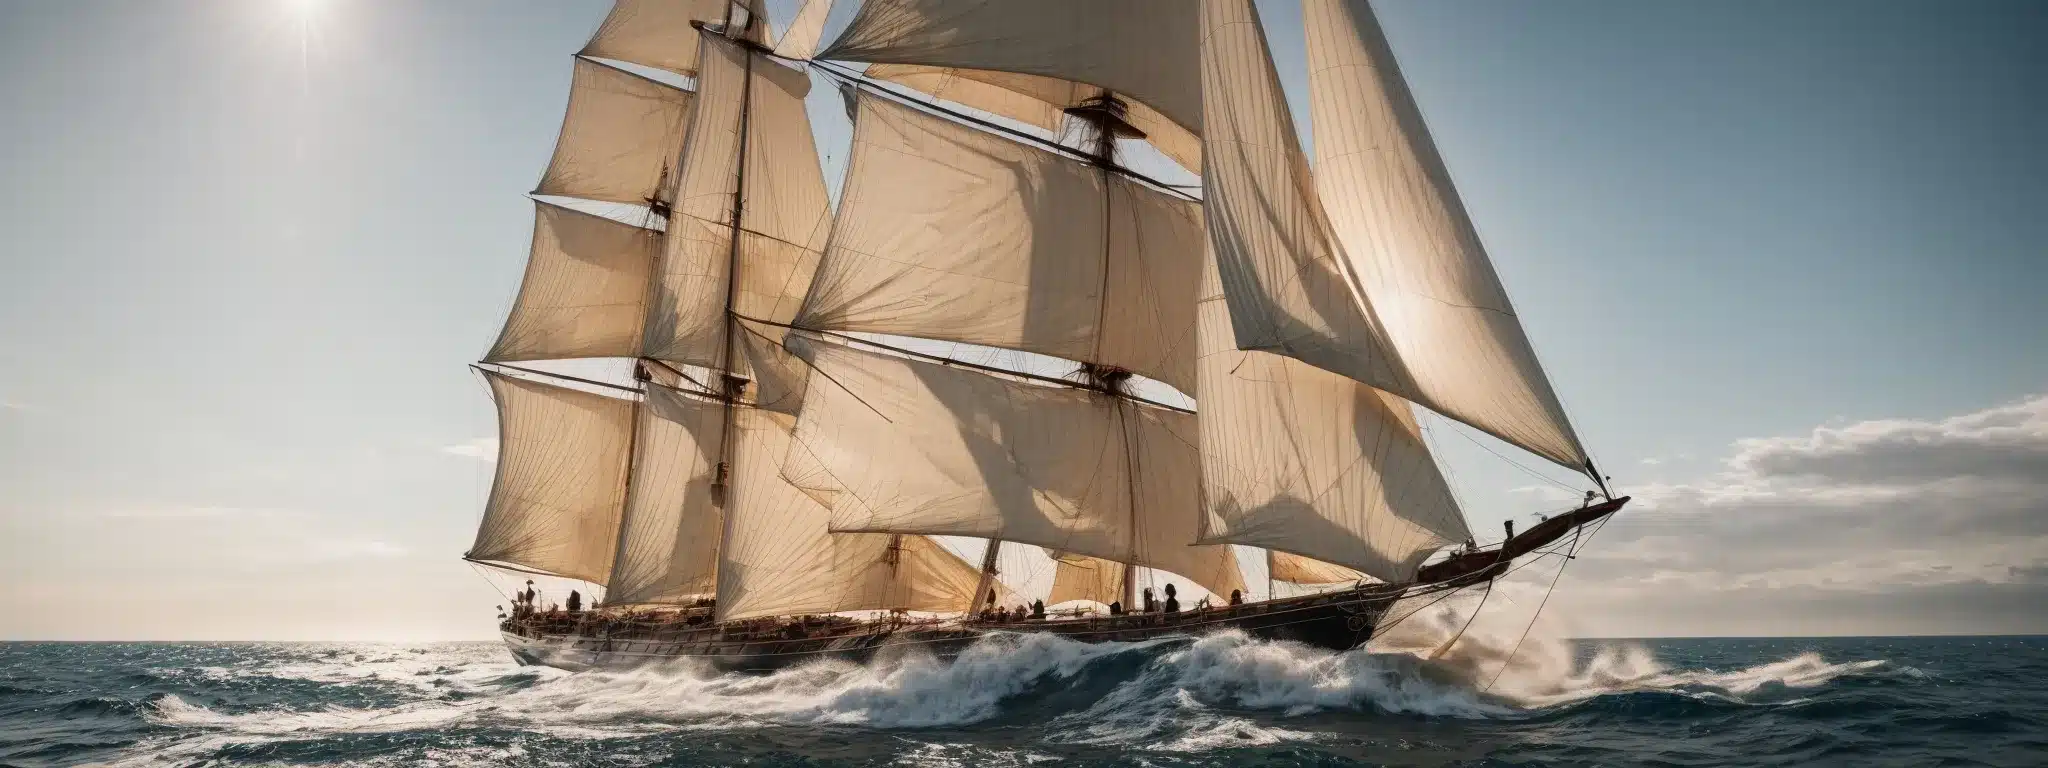 A Sturdy Ship With Unfurled Sails Glides Through Open, Sunlit Waters, Embarking On An Adventurous Journey.